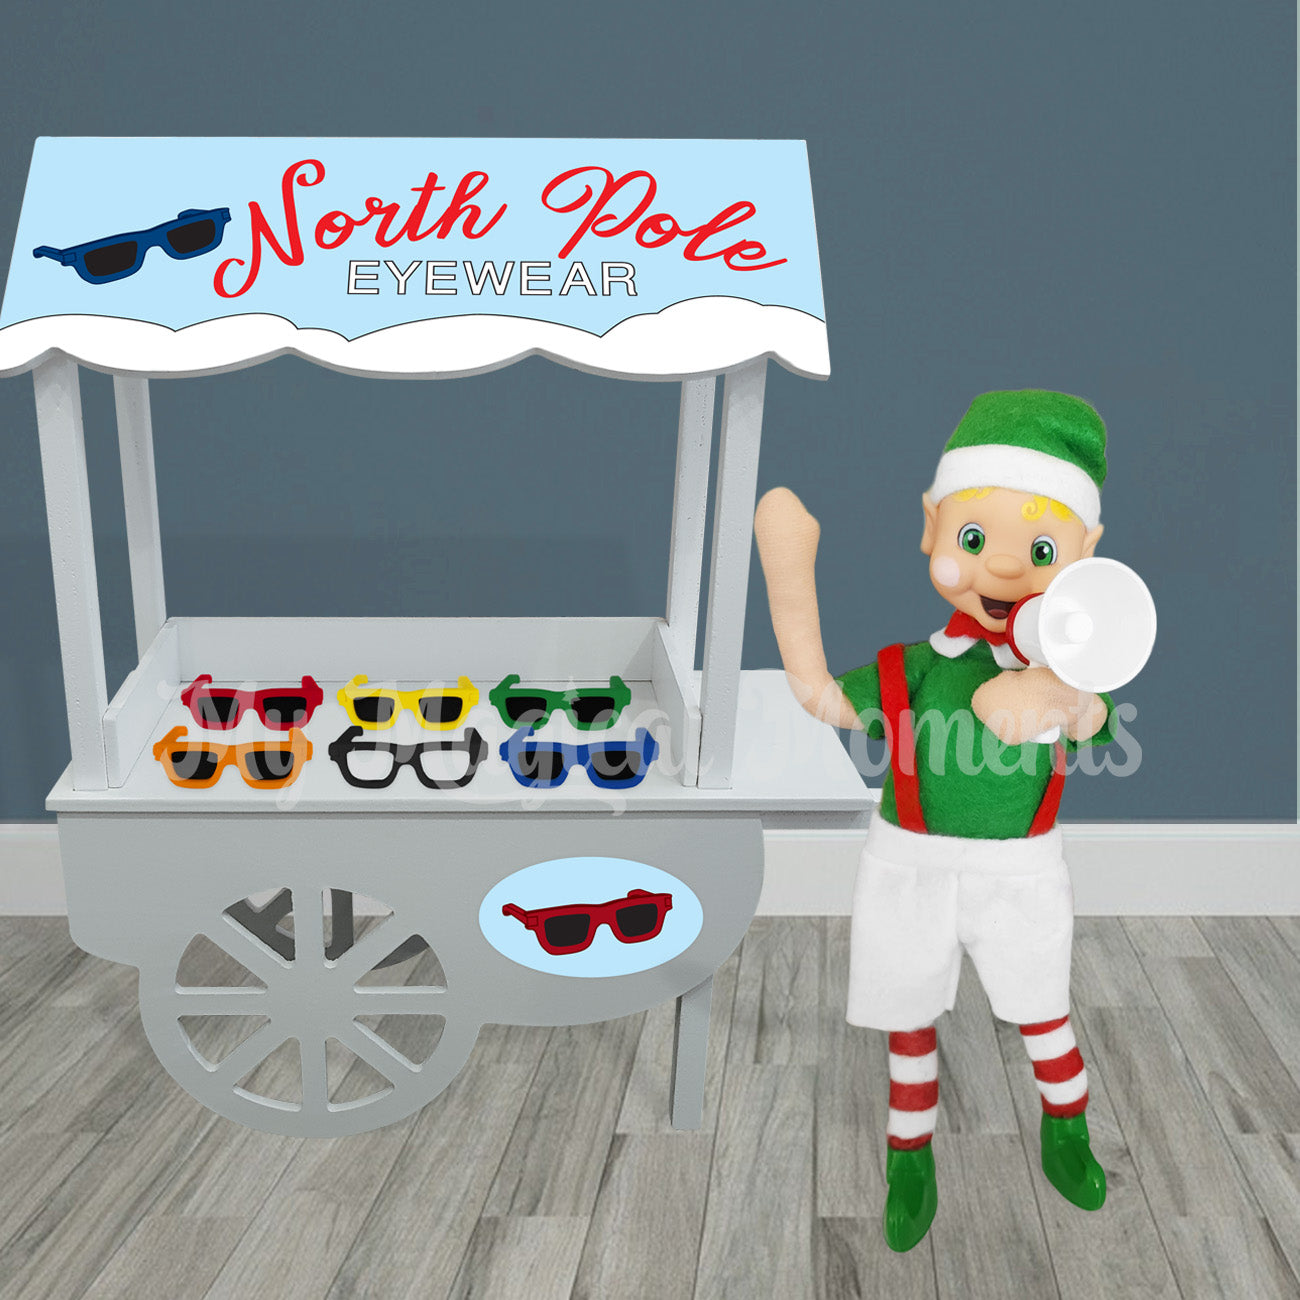 Elf selling sunglasses and glasses in their store